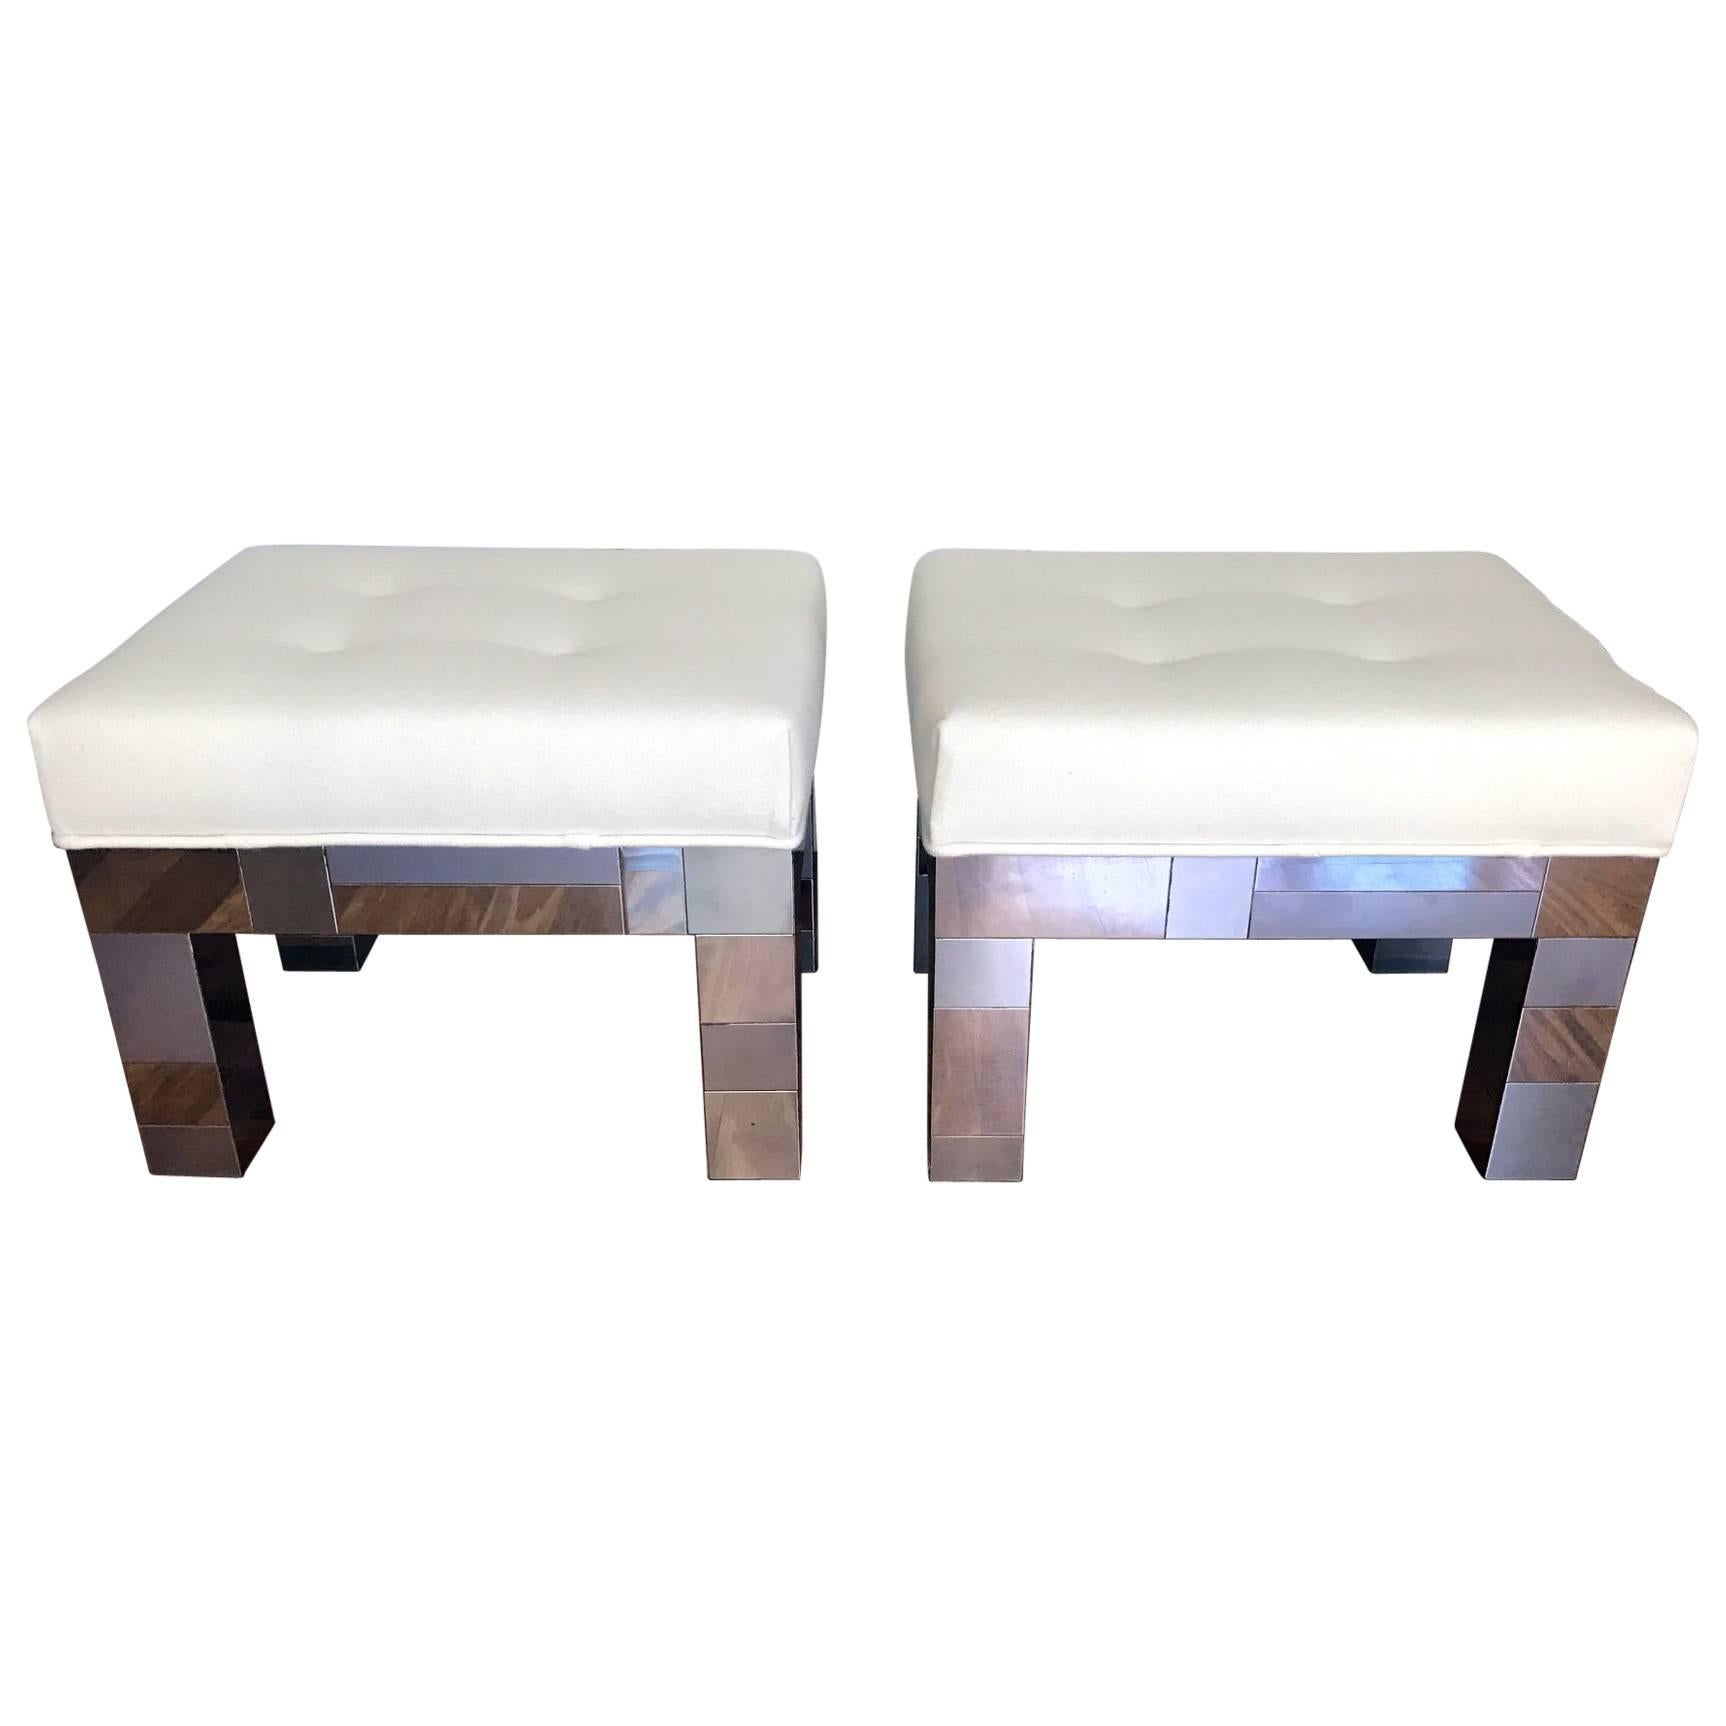 Pair of Cityscape Benches by Paul Evans for Directional